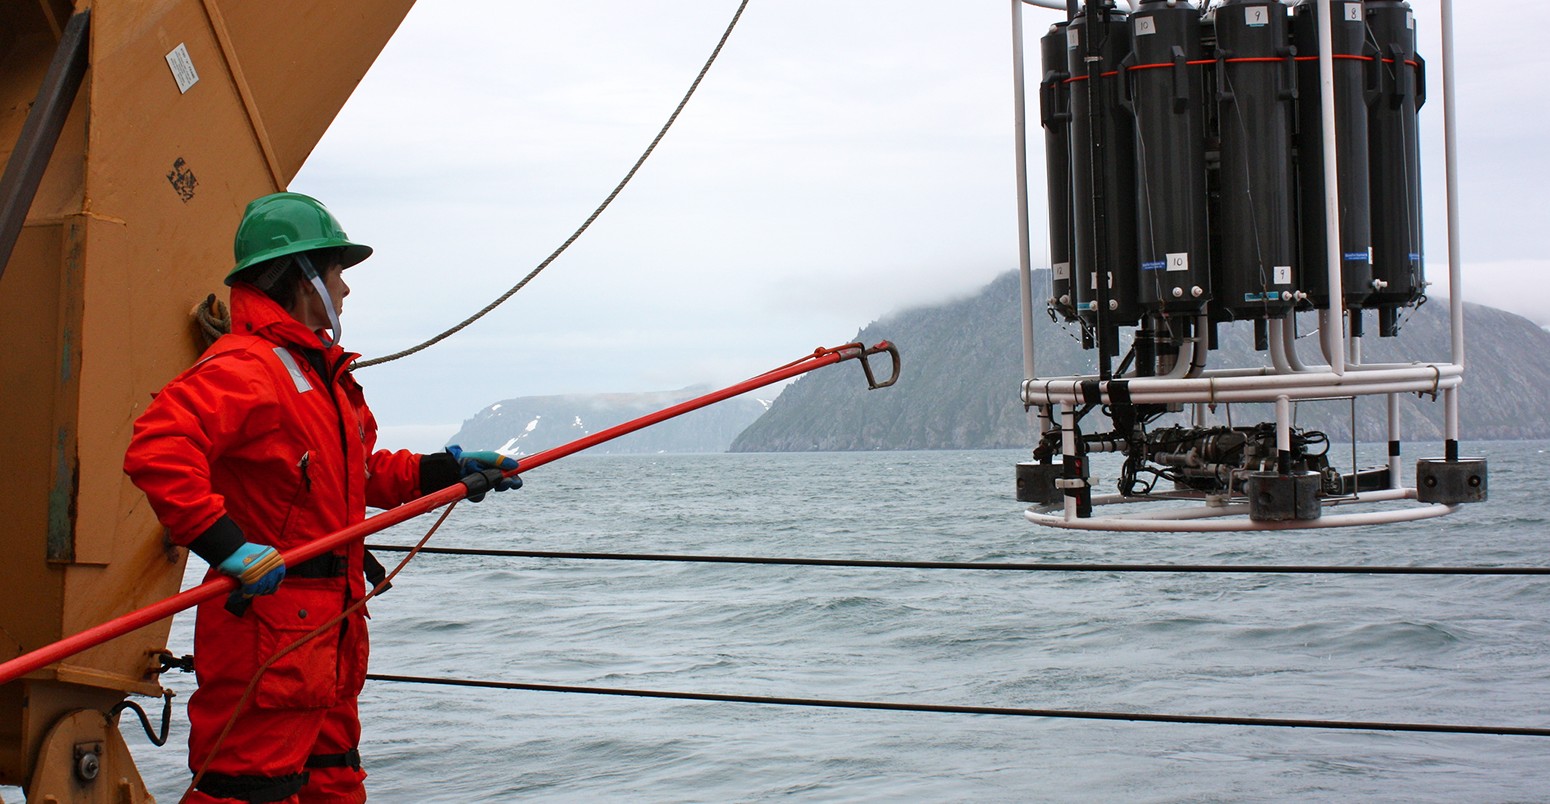 Holley Kelly helps retrieve the CTD/Rosette ensemble from the Bering Strait, east of the Diomede Islands, June 2011